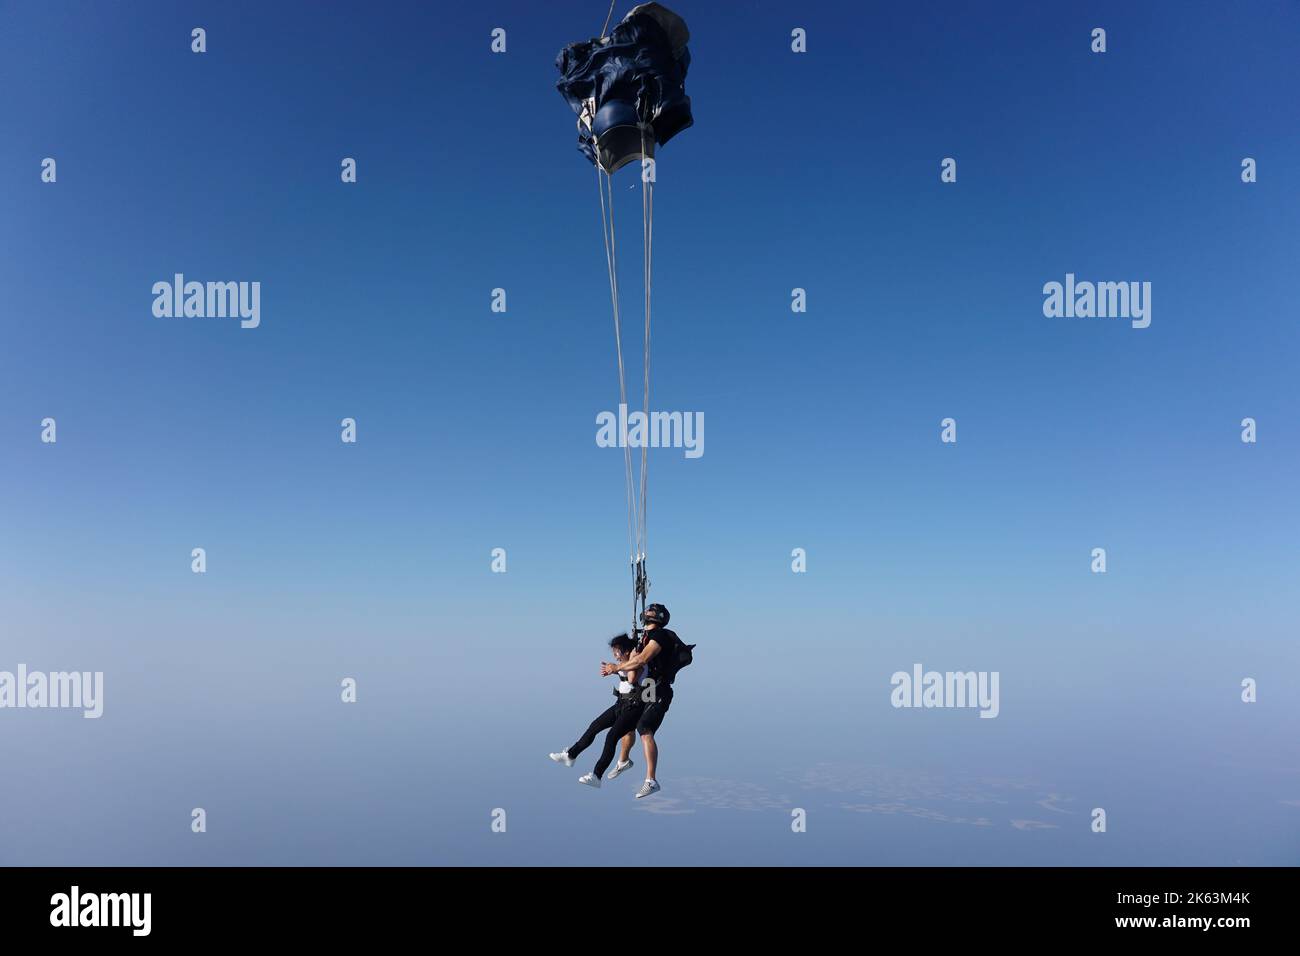 Dubai, United Arab Emirates: certified skydiving tandem instructor, with a beginner attached via harness, deploys the parachute midair to create drag. Stock Photo